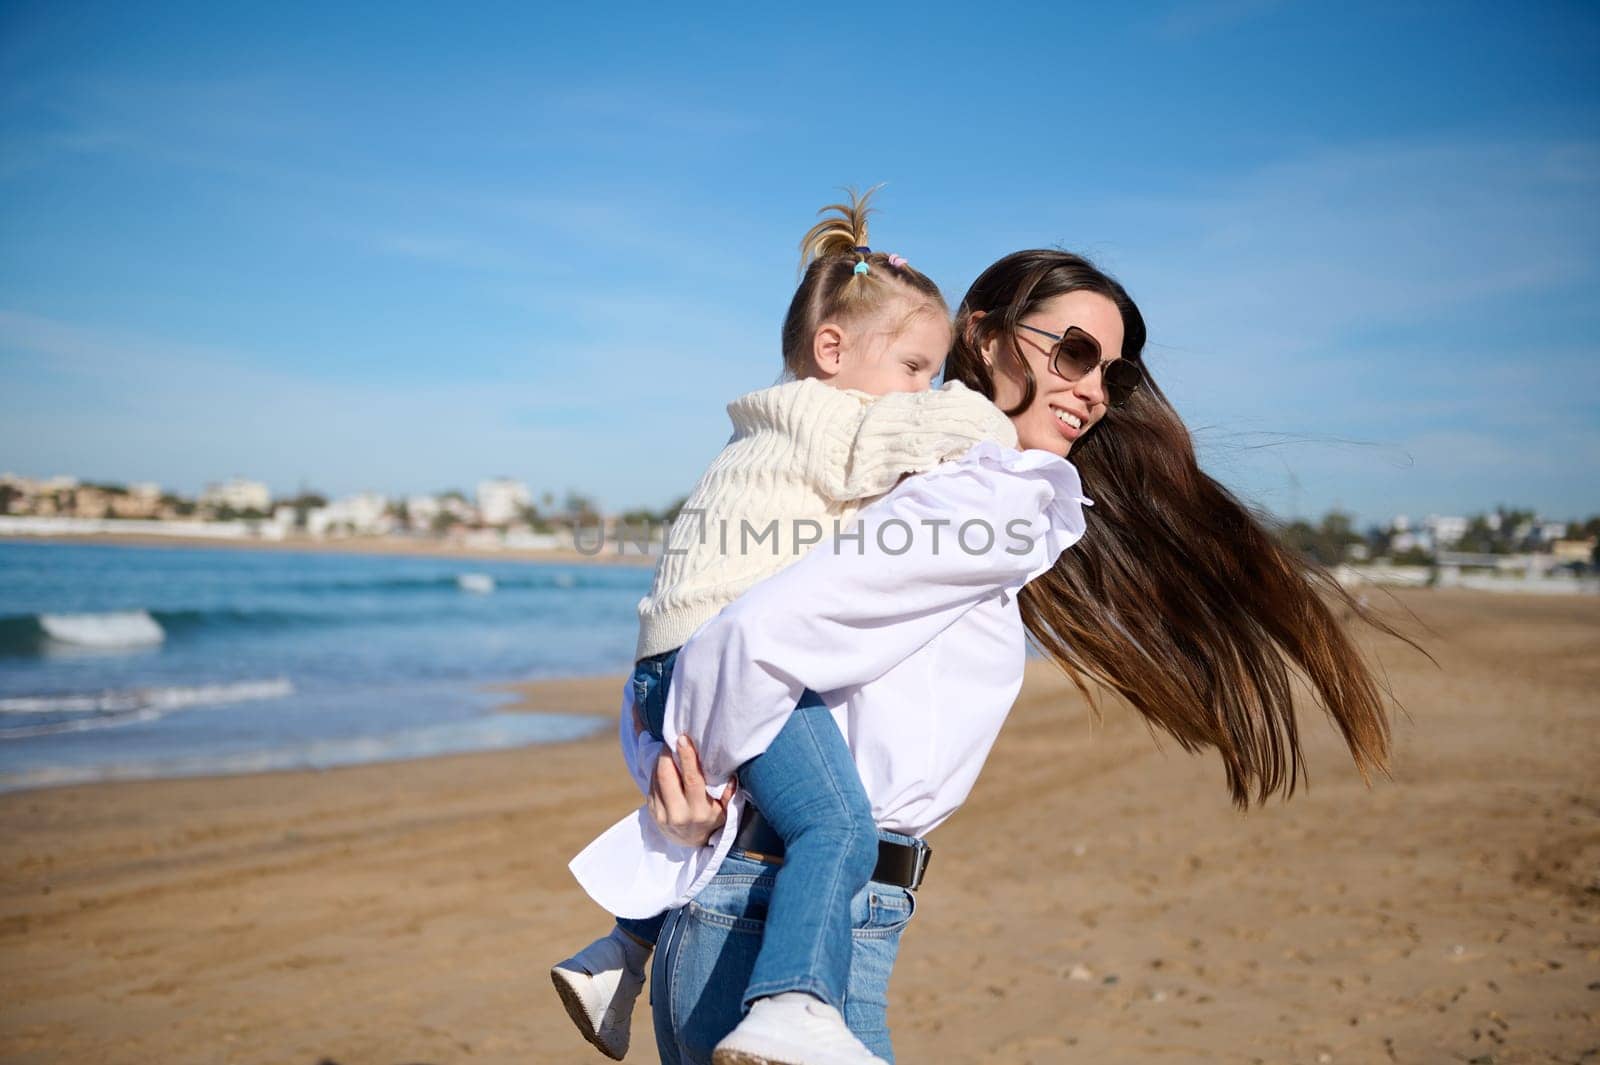 Rear view of a happy mother giving piggyback ride to her lovely daughter at beach. Caring mom spinning her child she's holding on her back, enjoying wonderful moments together. Family relationships